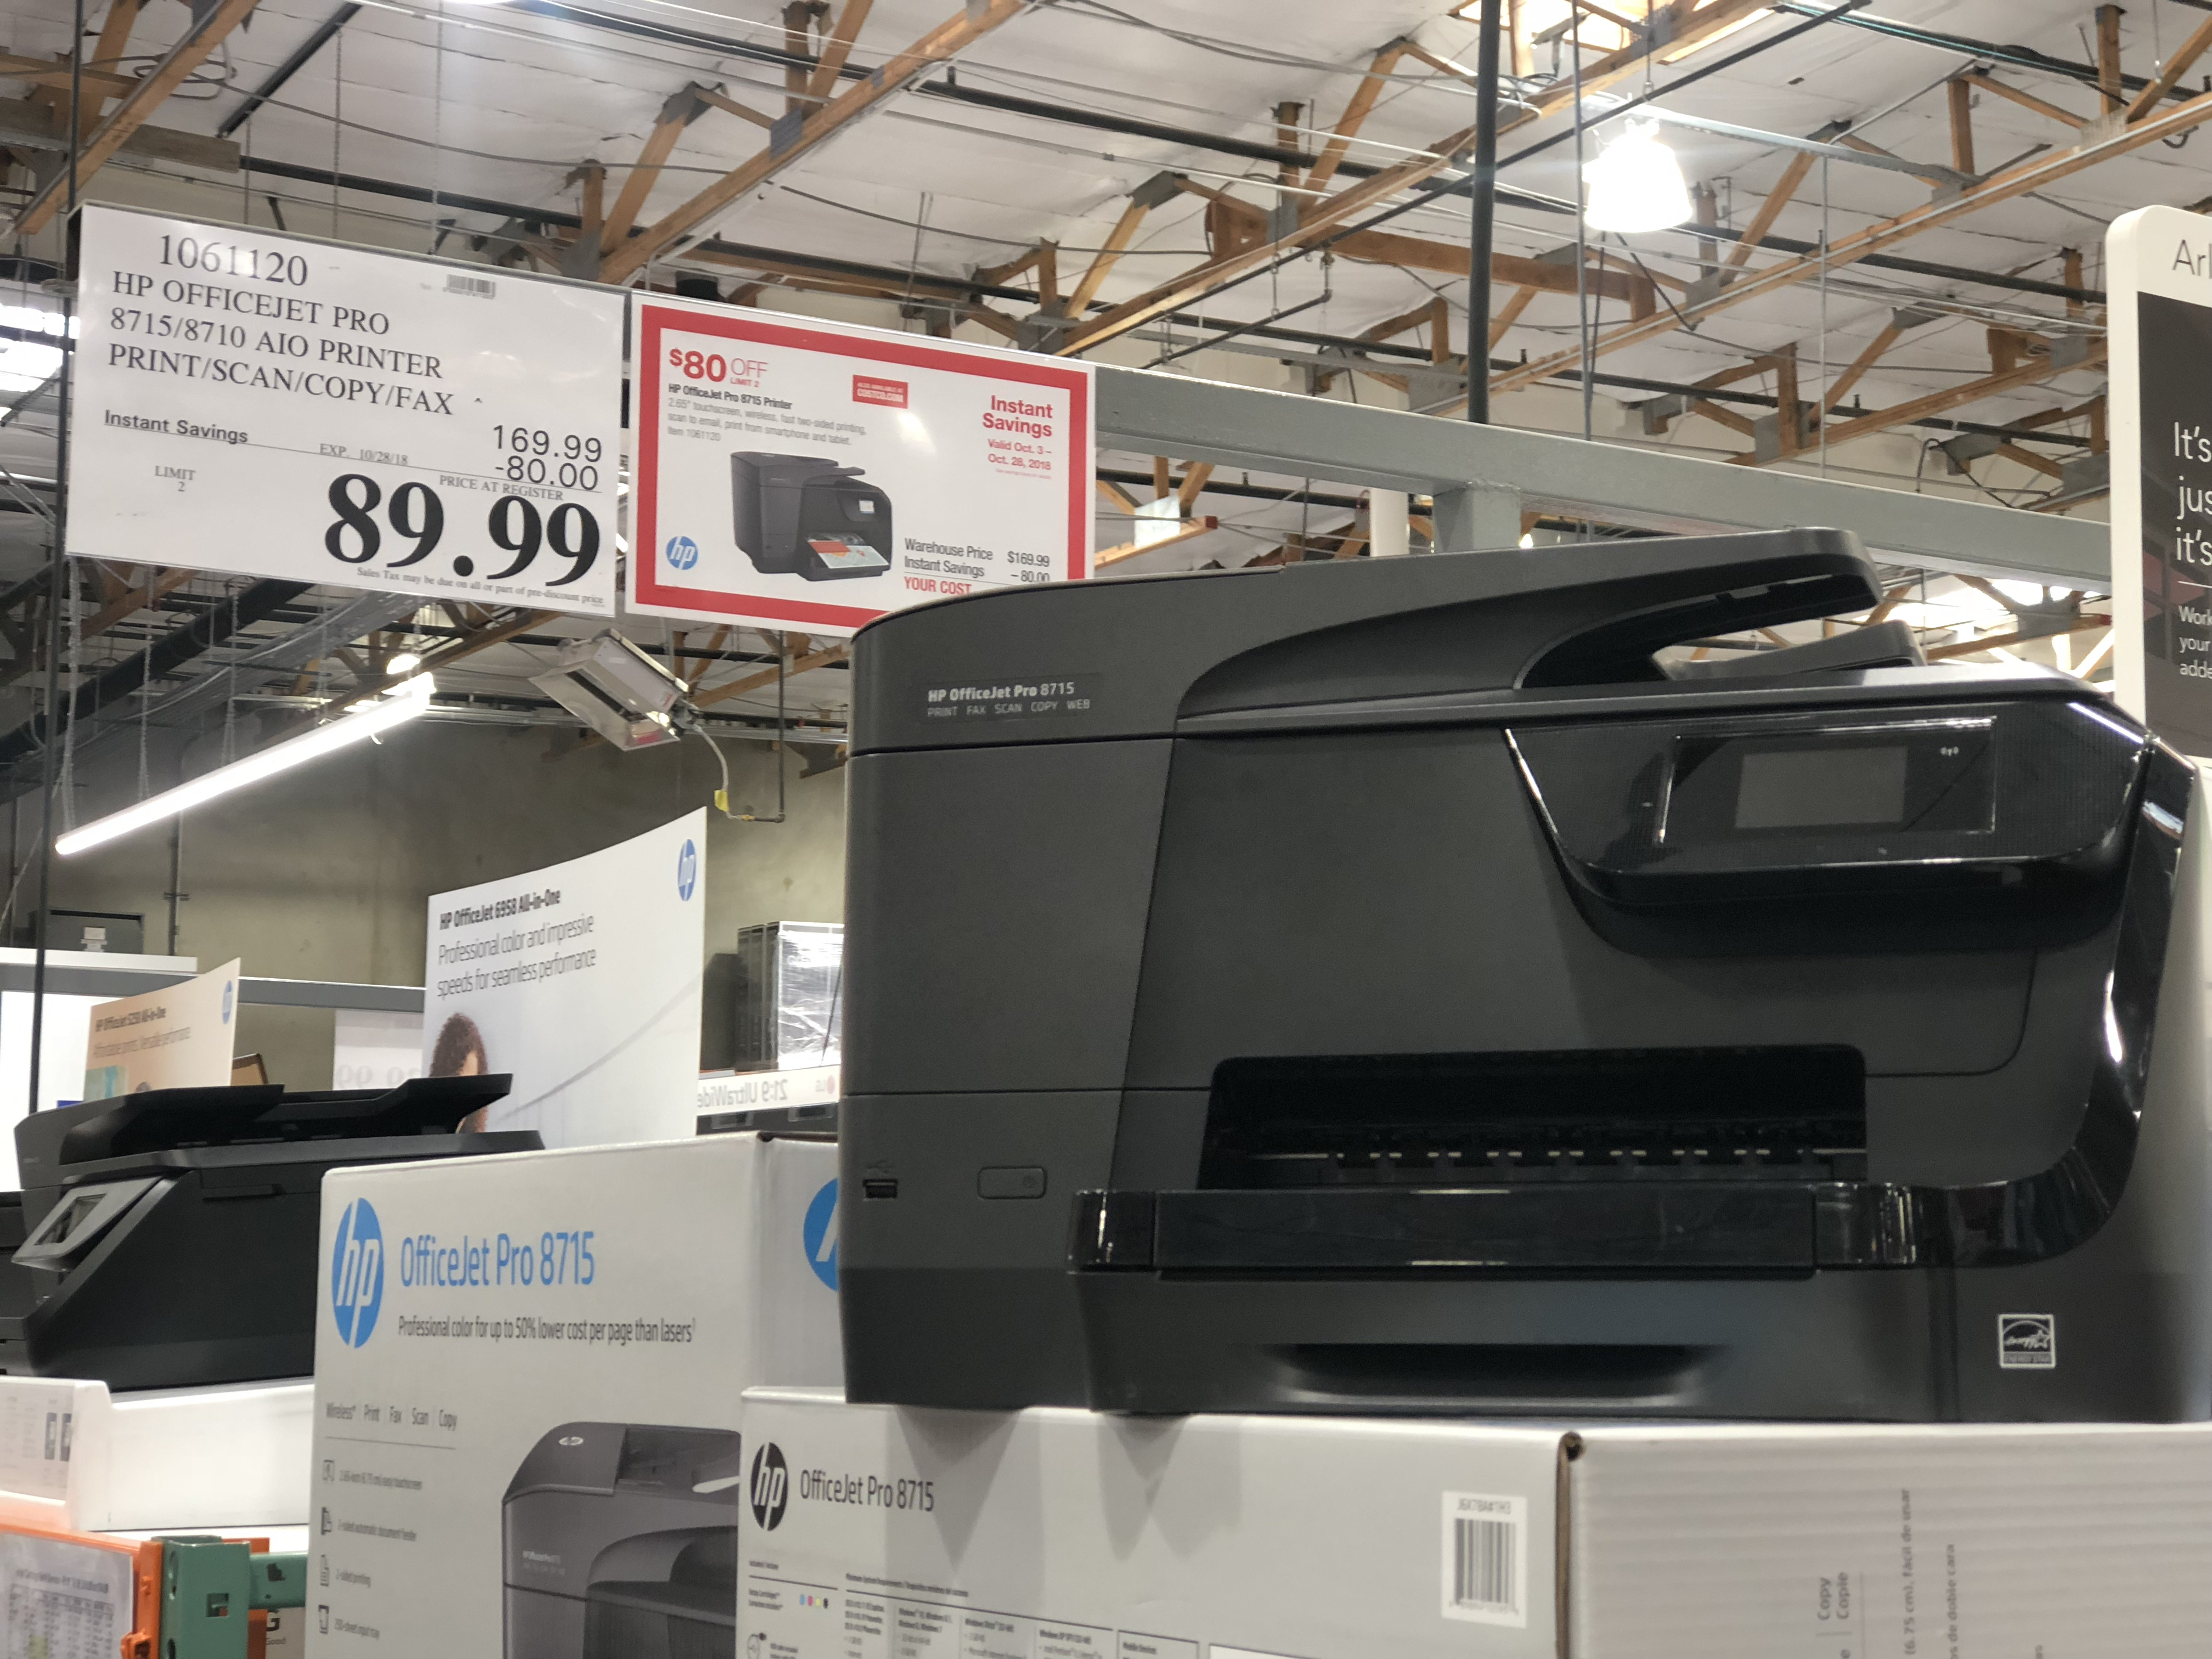 https://hip2save.com/wp-content/uploads/2018/10/hp-printer-at-costco.jpg?resize=4032%2C3024&strip=all